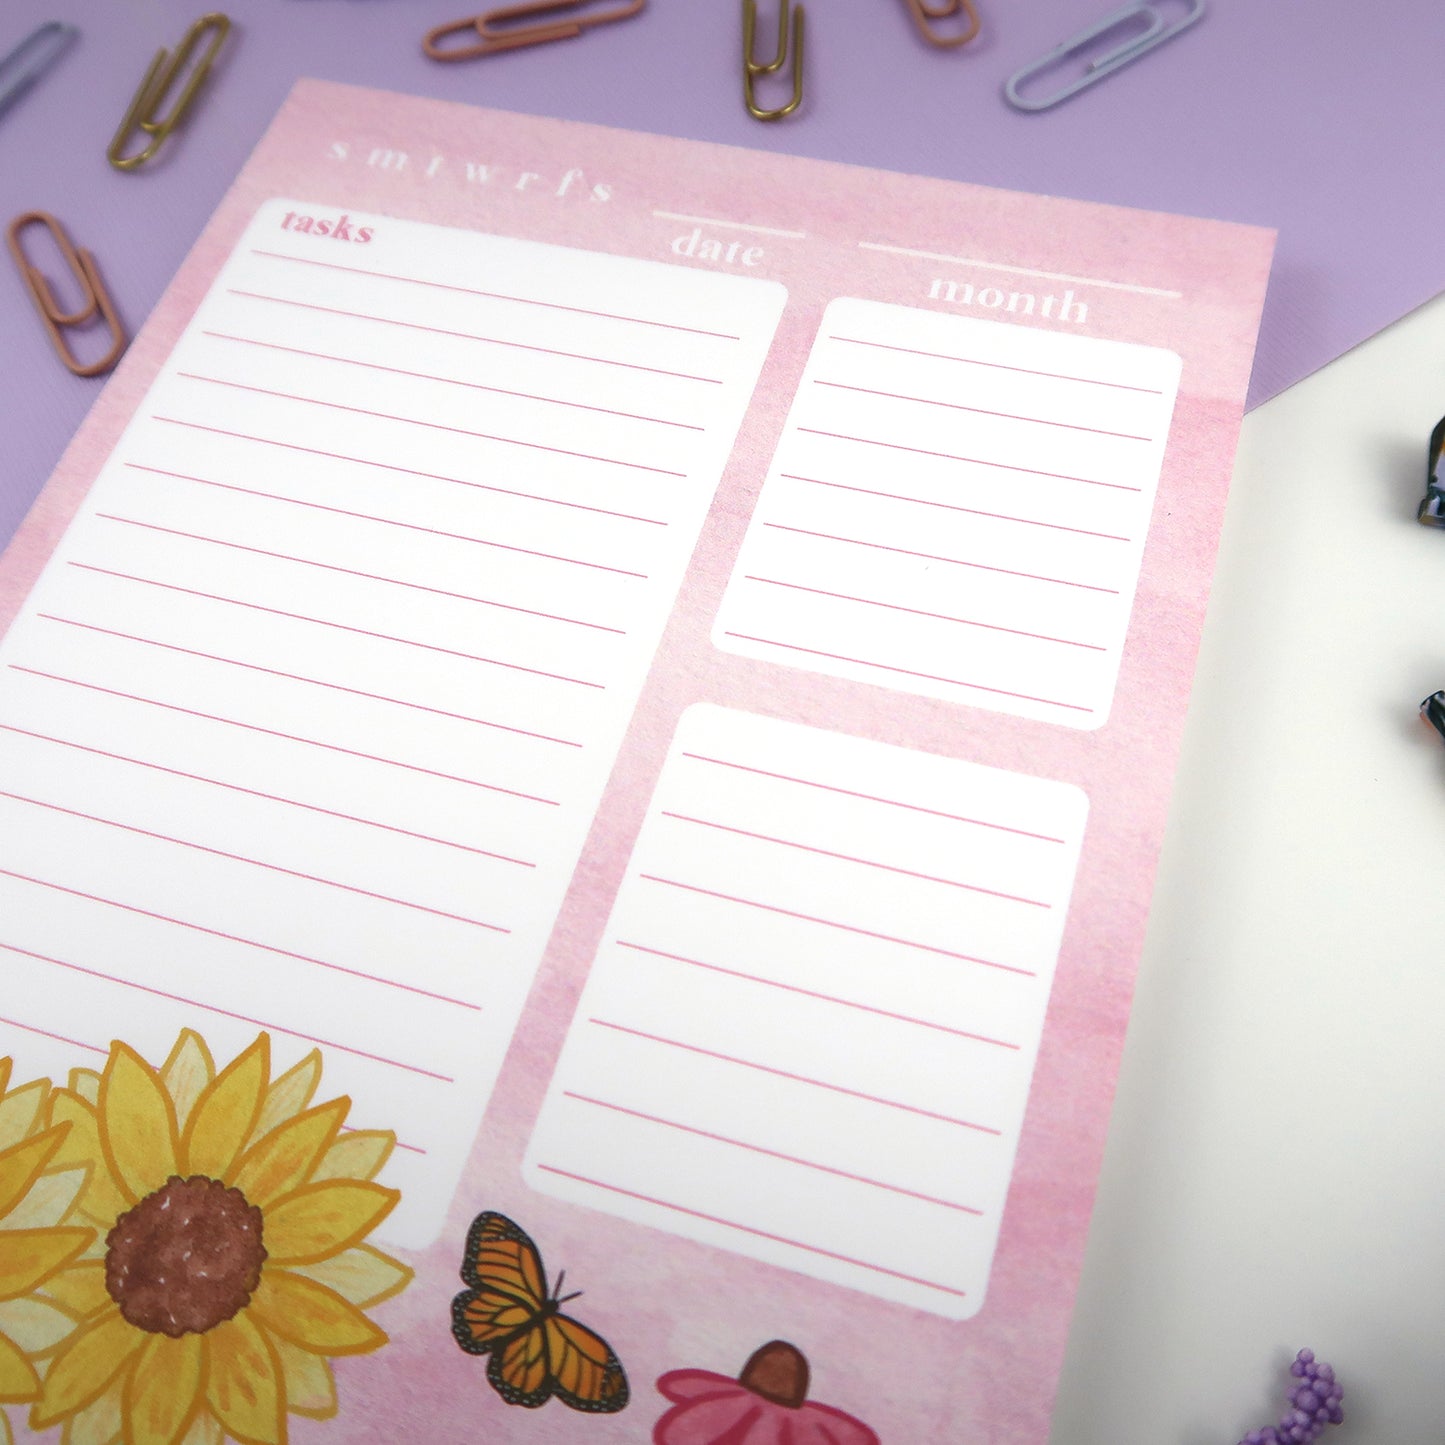 Fall Flowers Daily Planner - Stationery